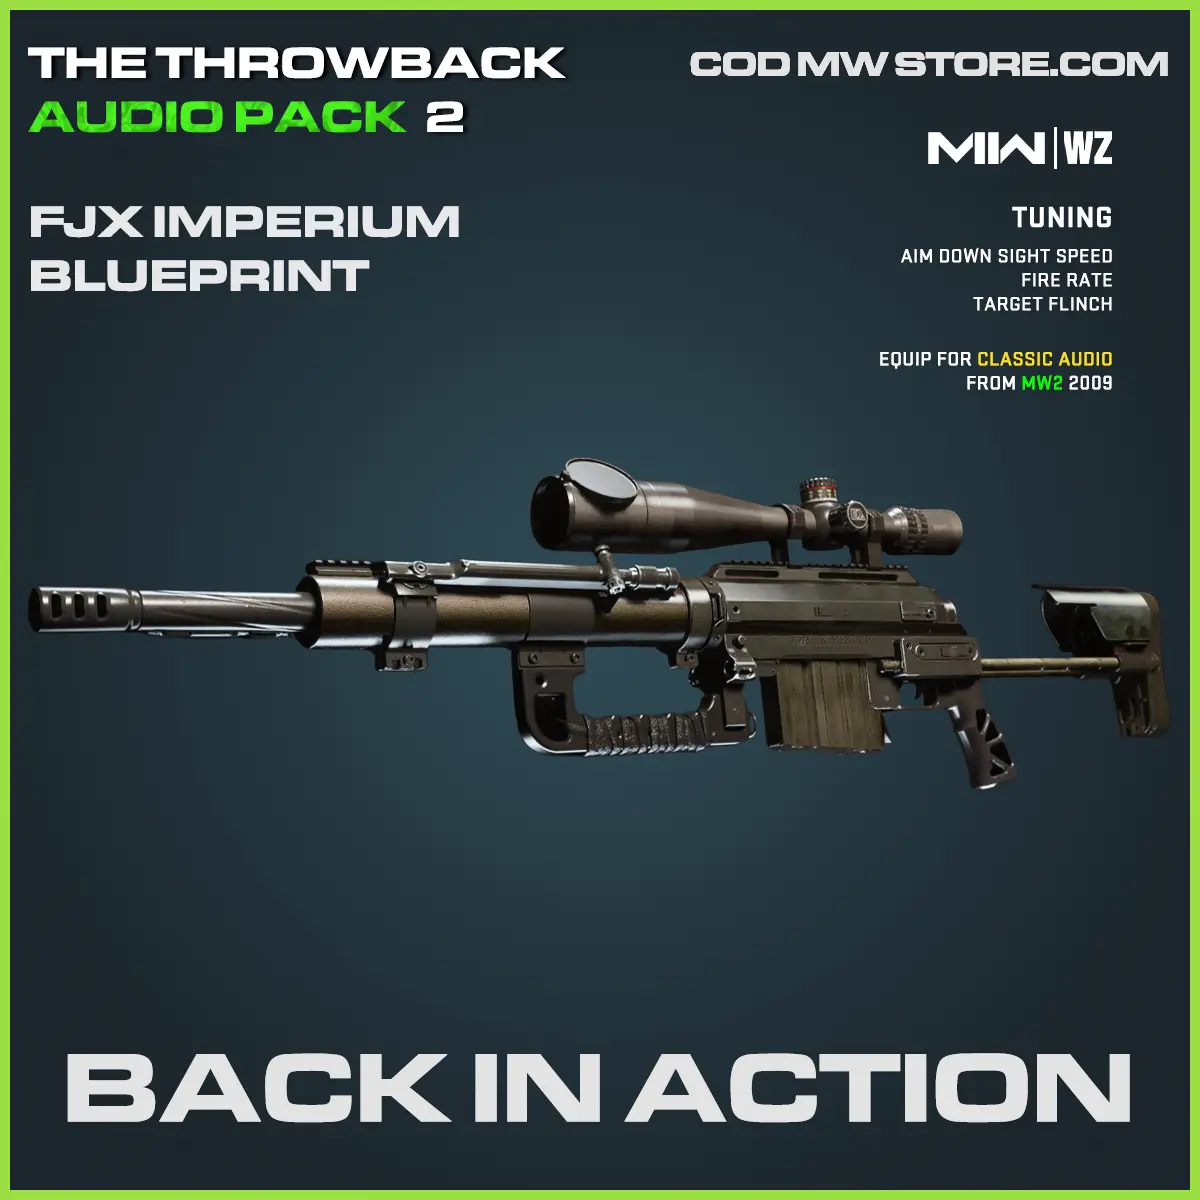 RETURN OF THE KING - The Intervention is BACK in Modern Warfare 2! 